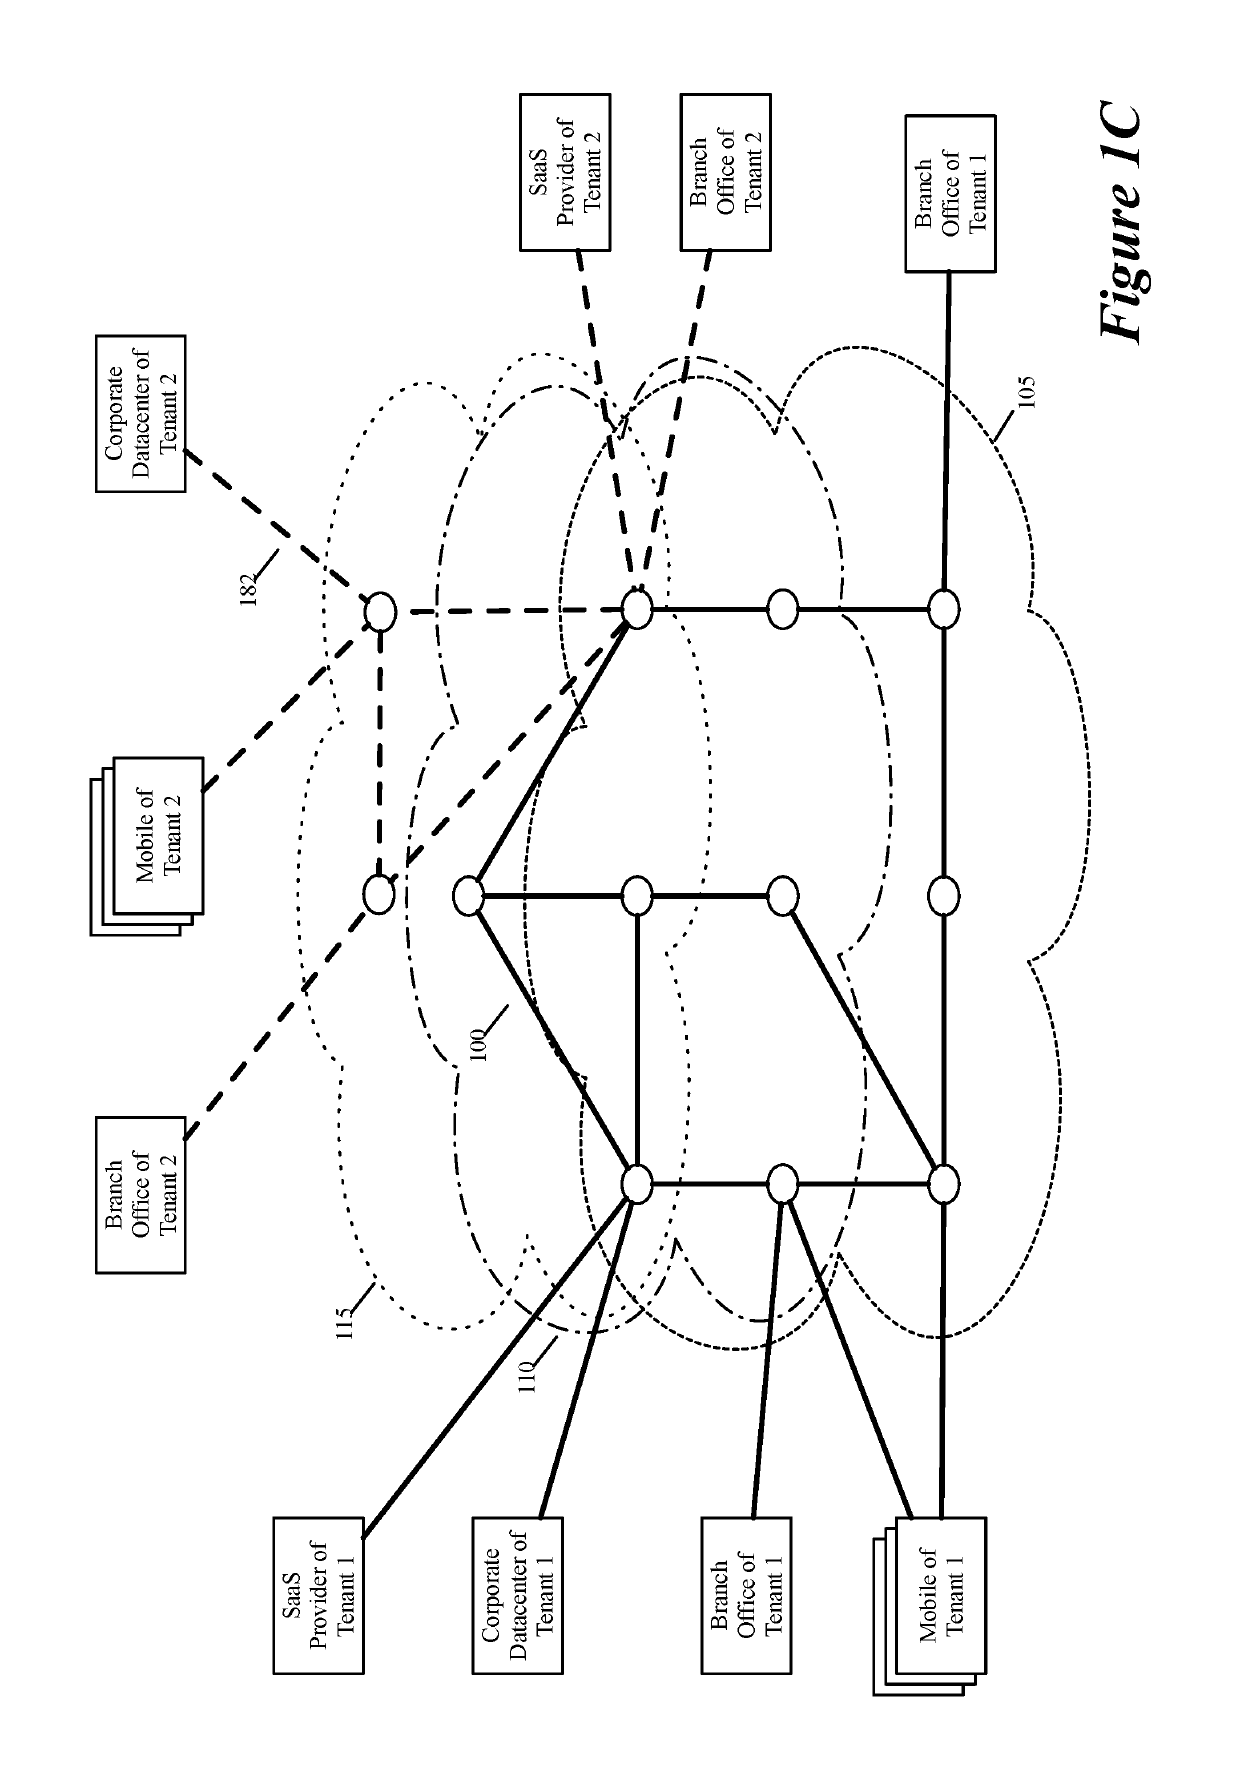 Defining and distributing routes for a virtual network